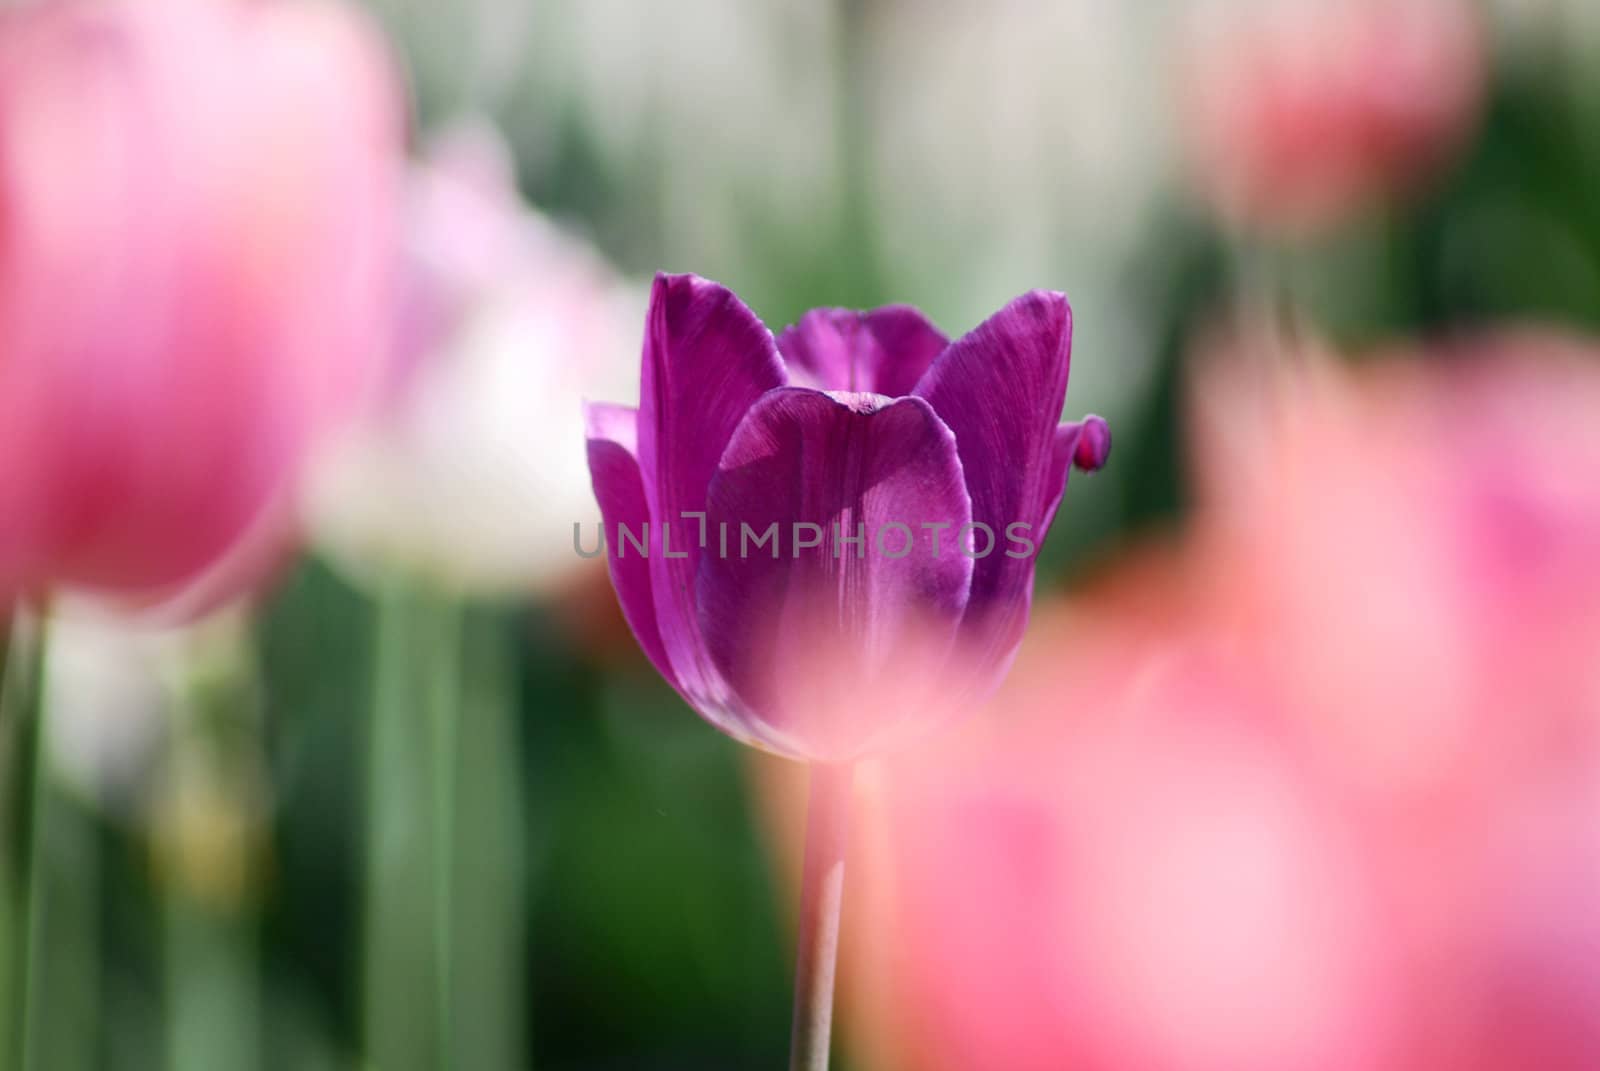 One violet tulip on other tulips in background by svtrotof